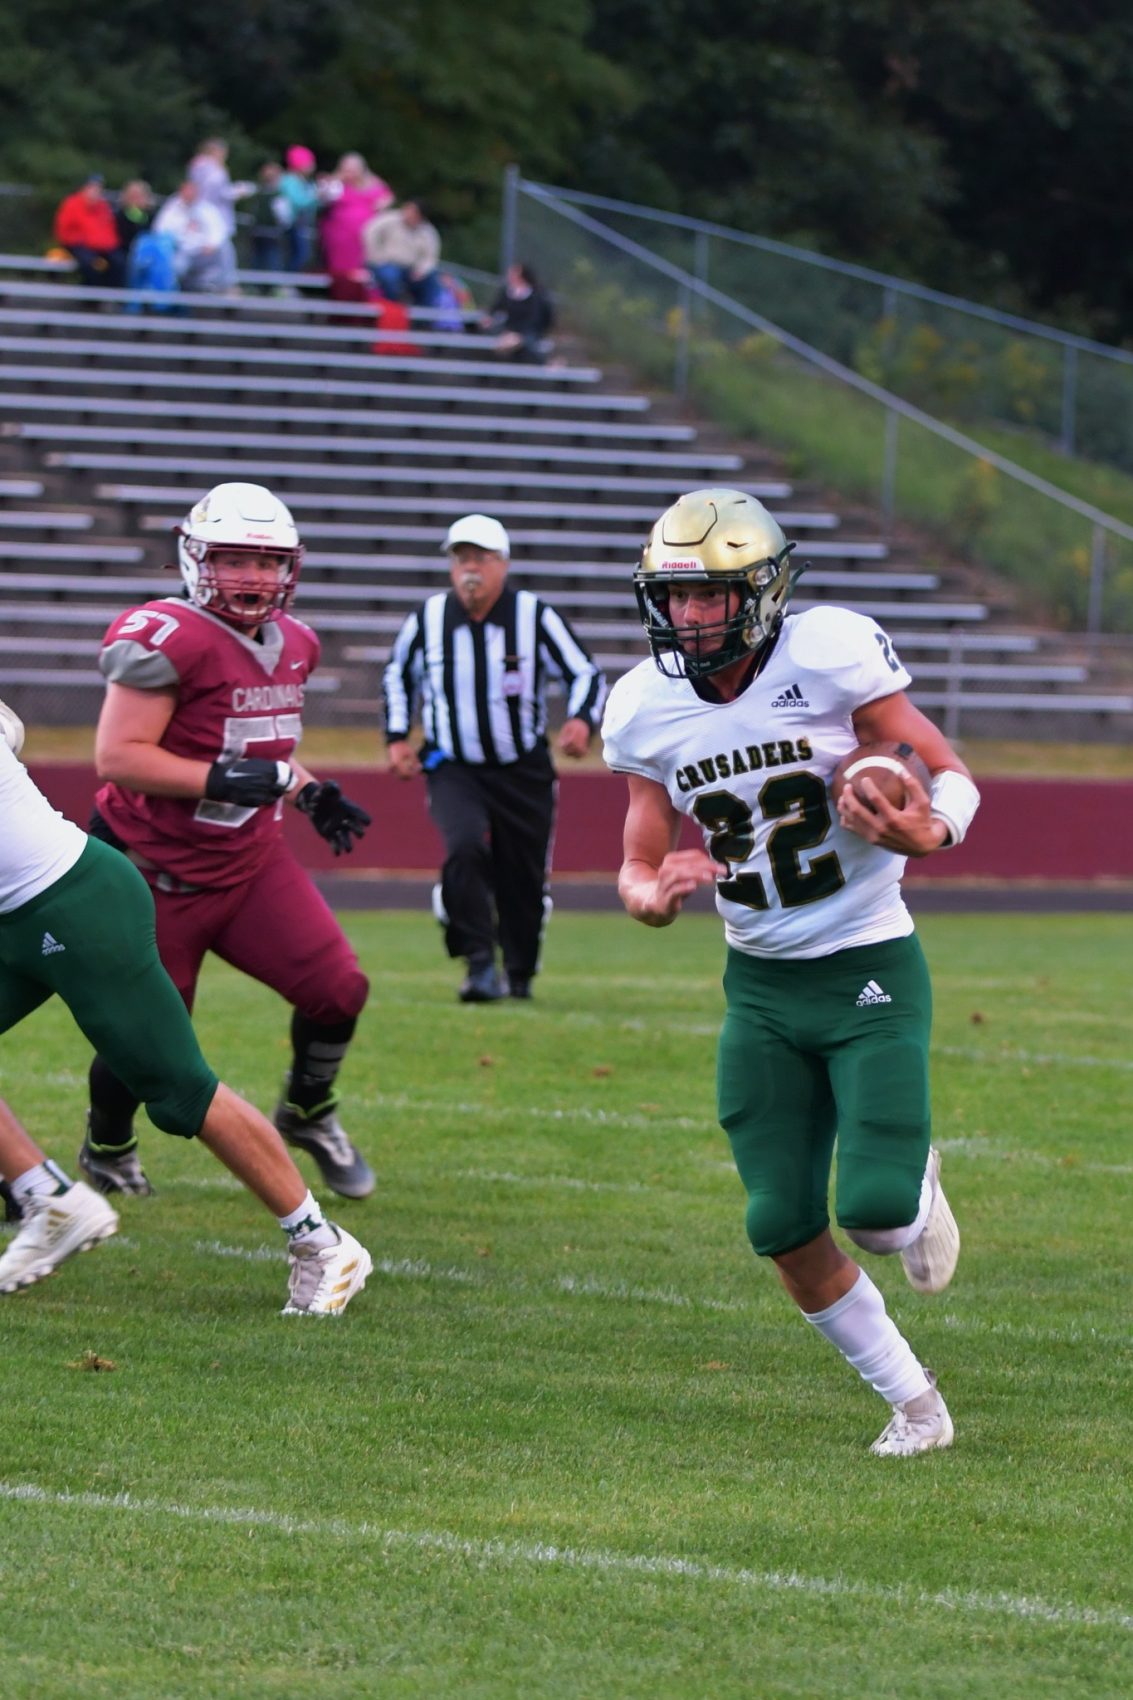 Muskegon Catholic earns nonleague victory over Orchard View